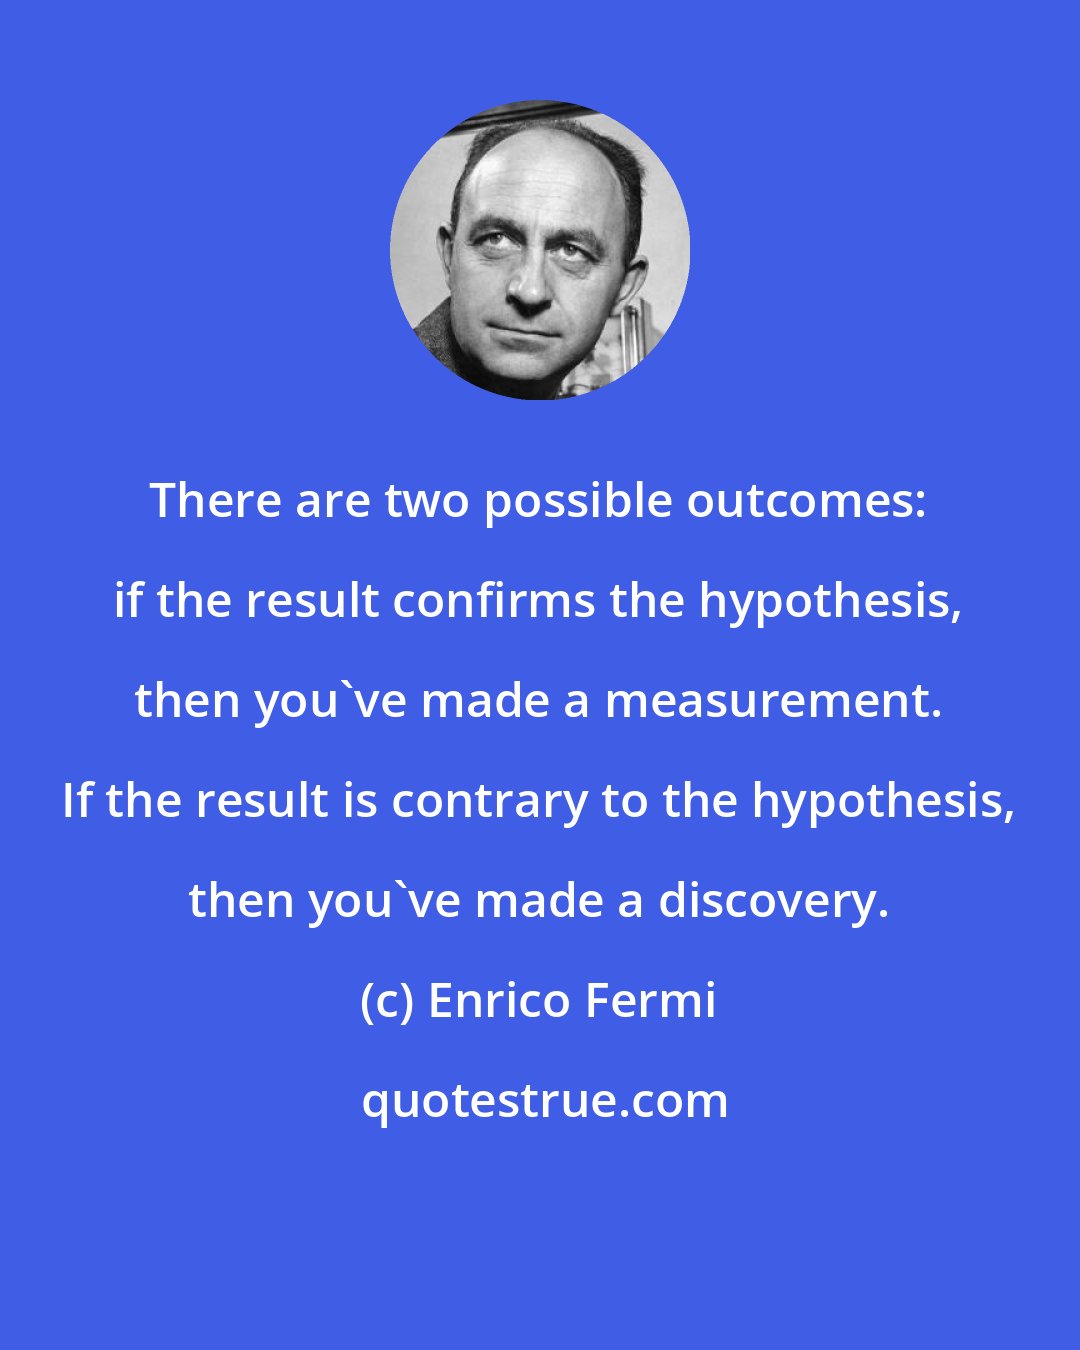 Enrico Fermi: There are two possible outcomes: if the result confirms the hypothesis, then you've made a measurement. If the result is contrary to the hypothesis, then you've made a discovery.